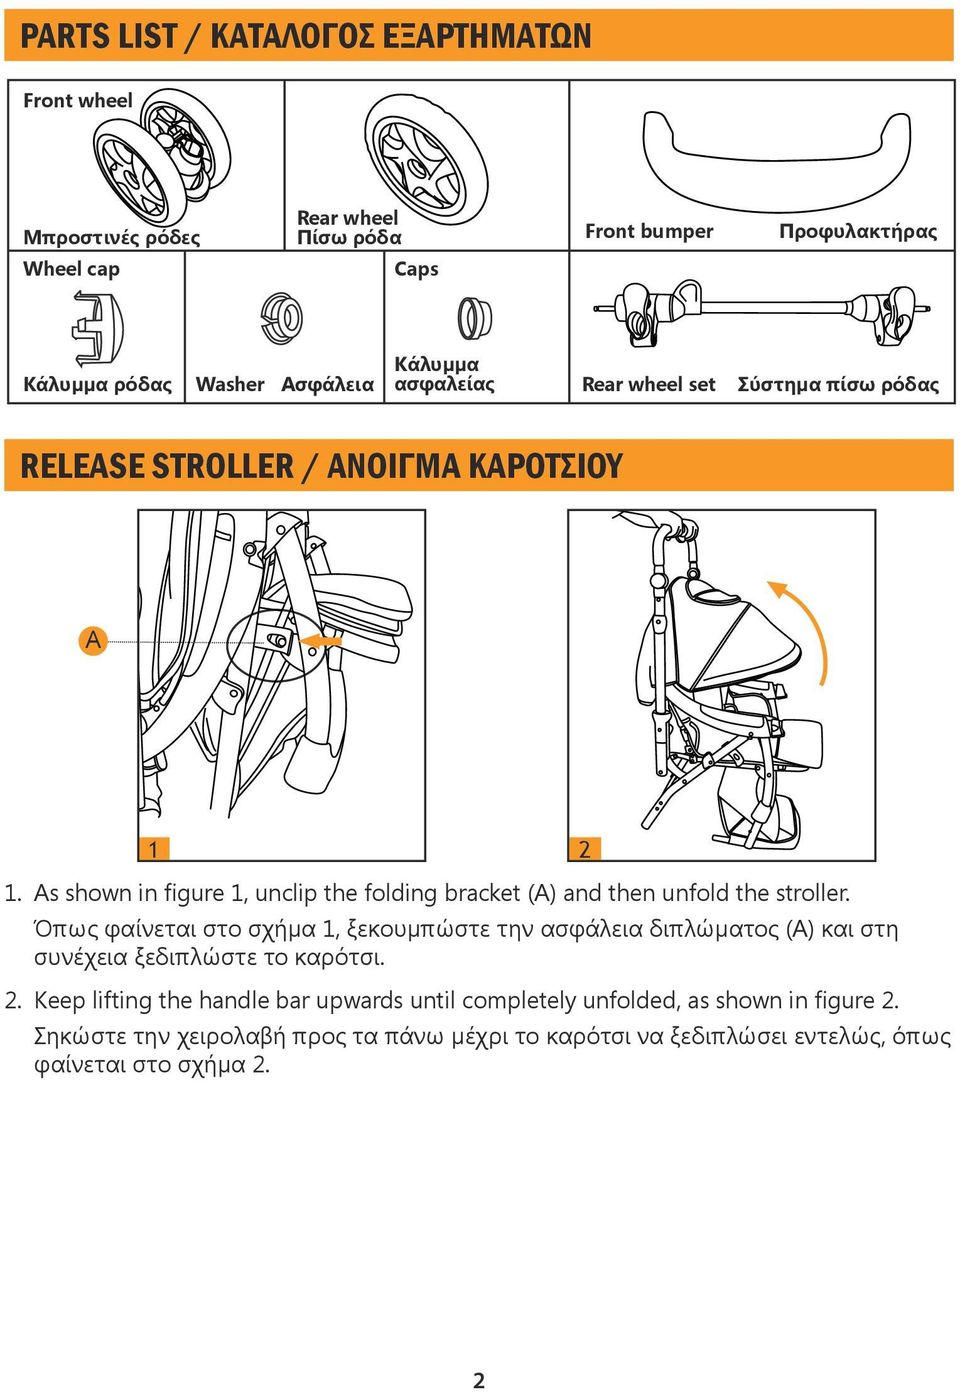 As shown in figure 1, unclip the folding bracket (A) and then unfold the stroller.